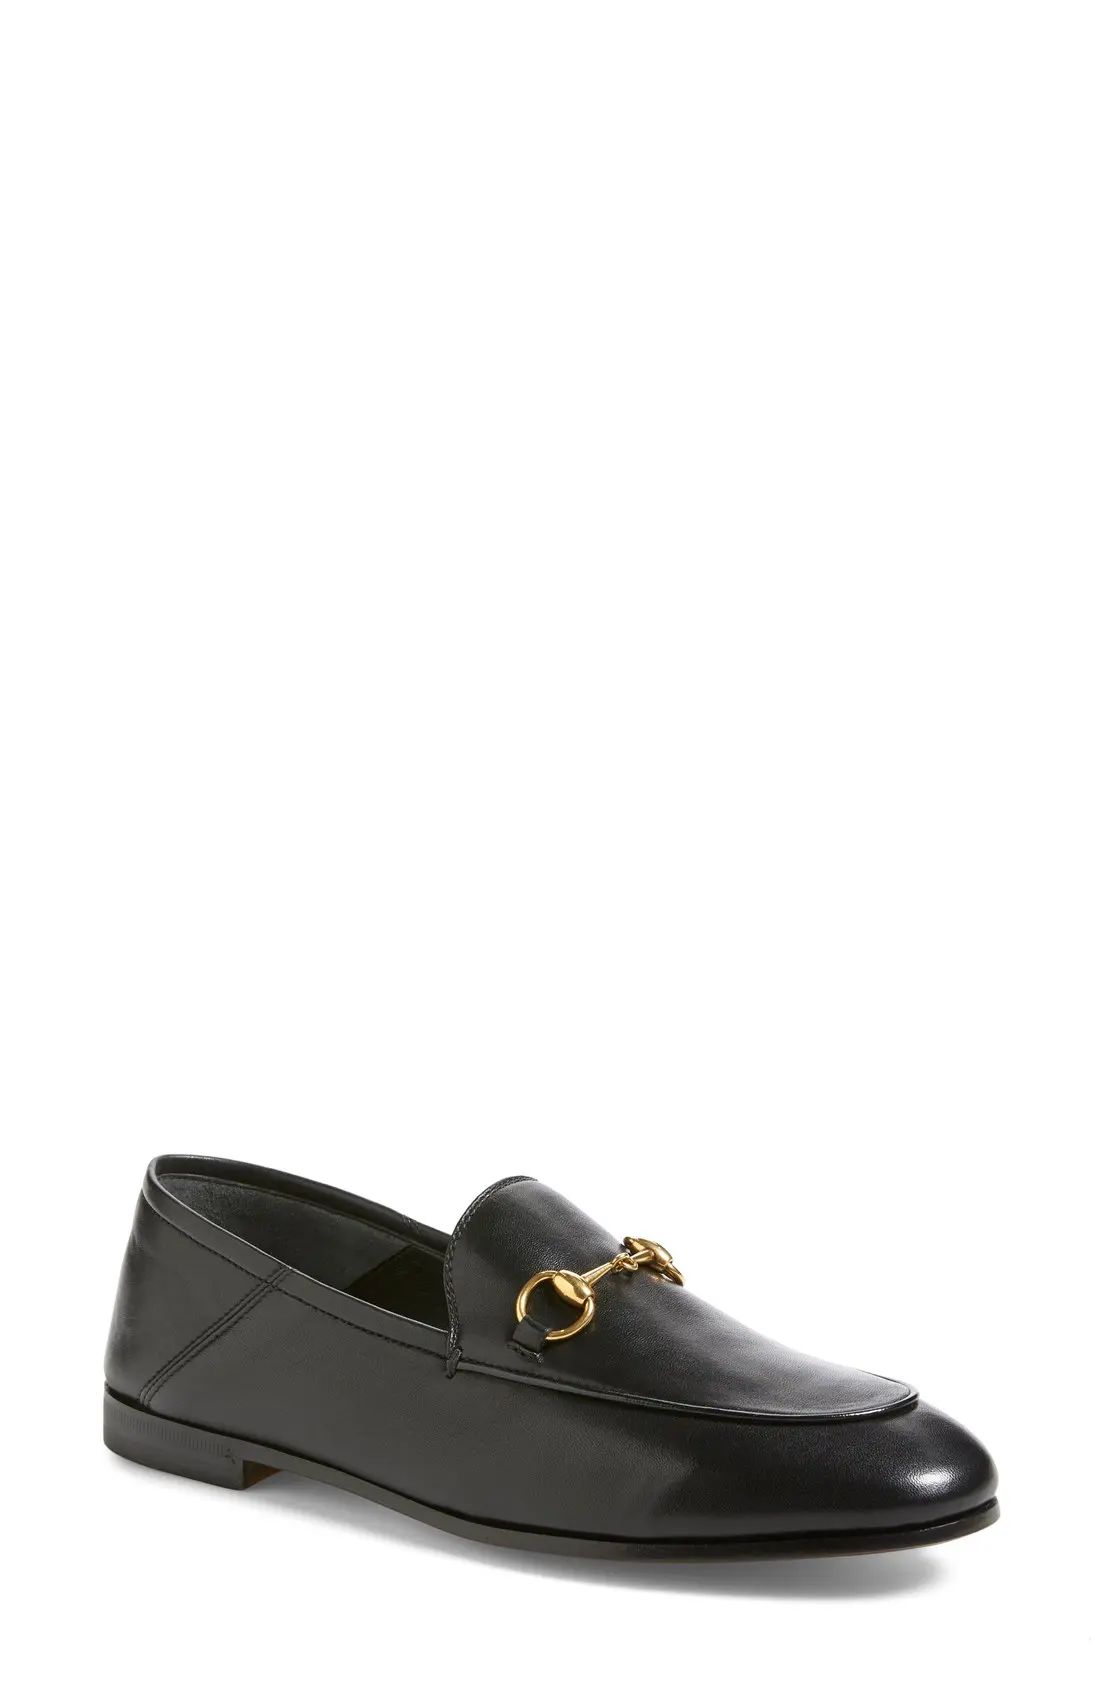 Brixton Convertible Loafer | Nordstrom